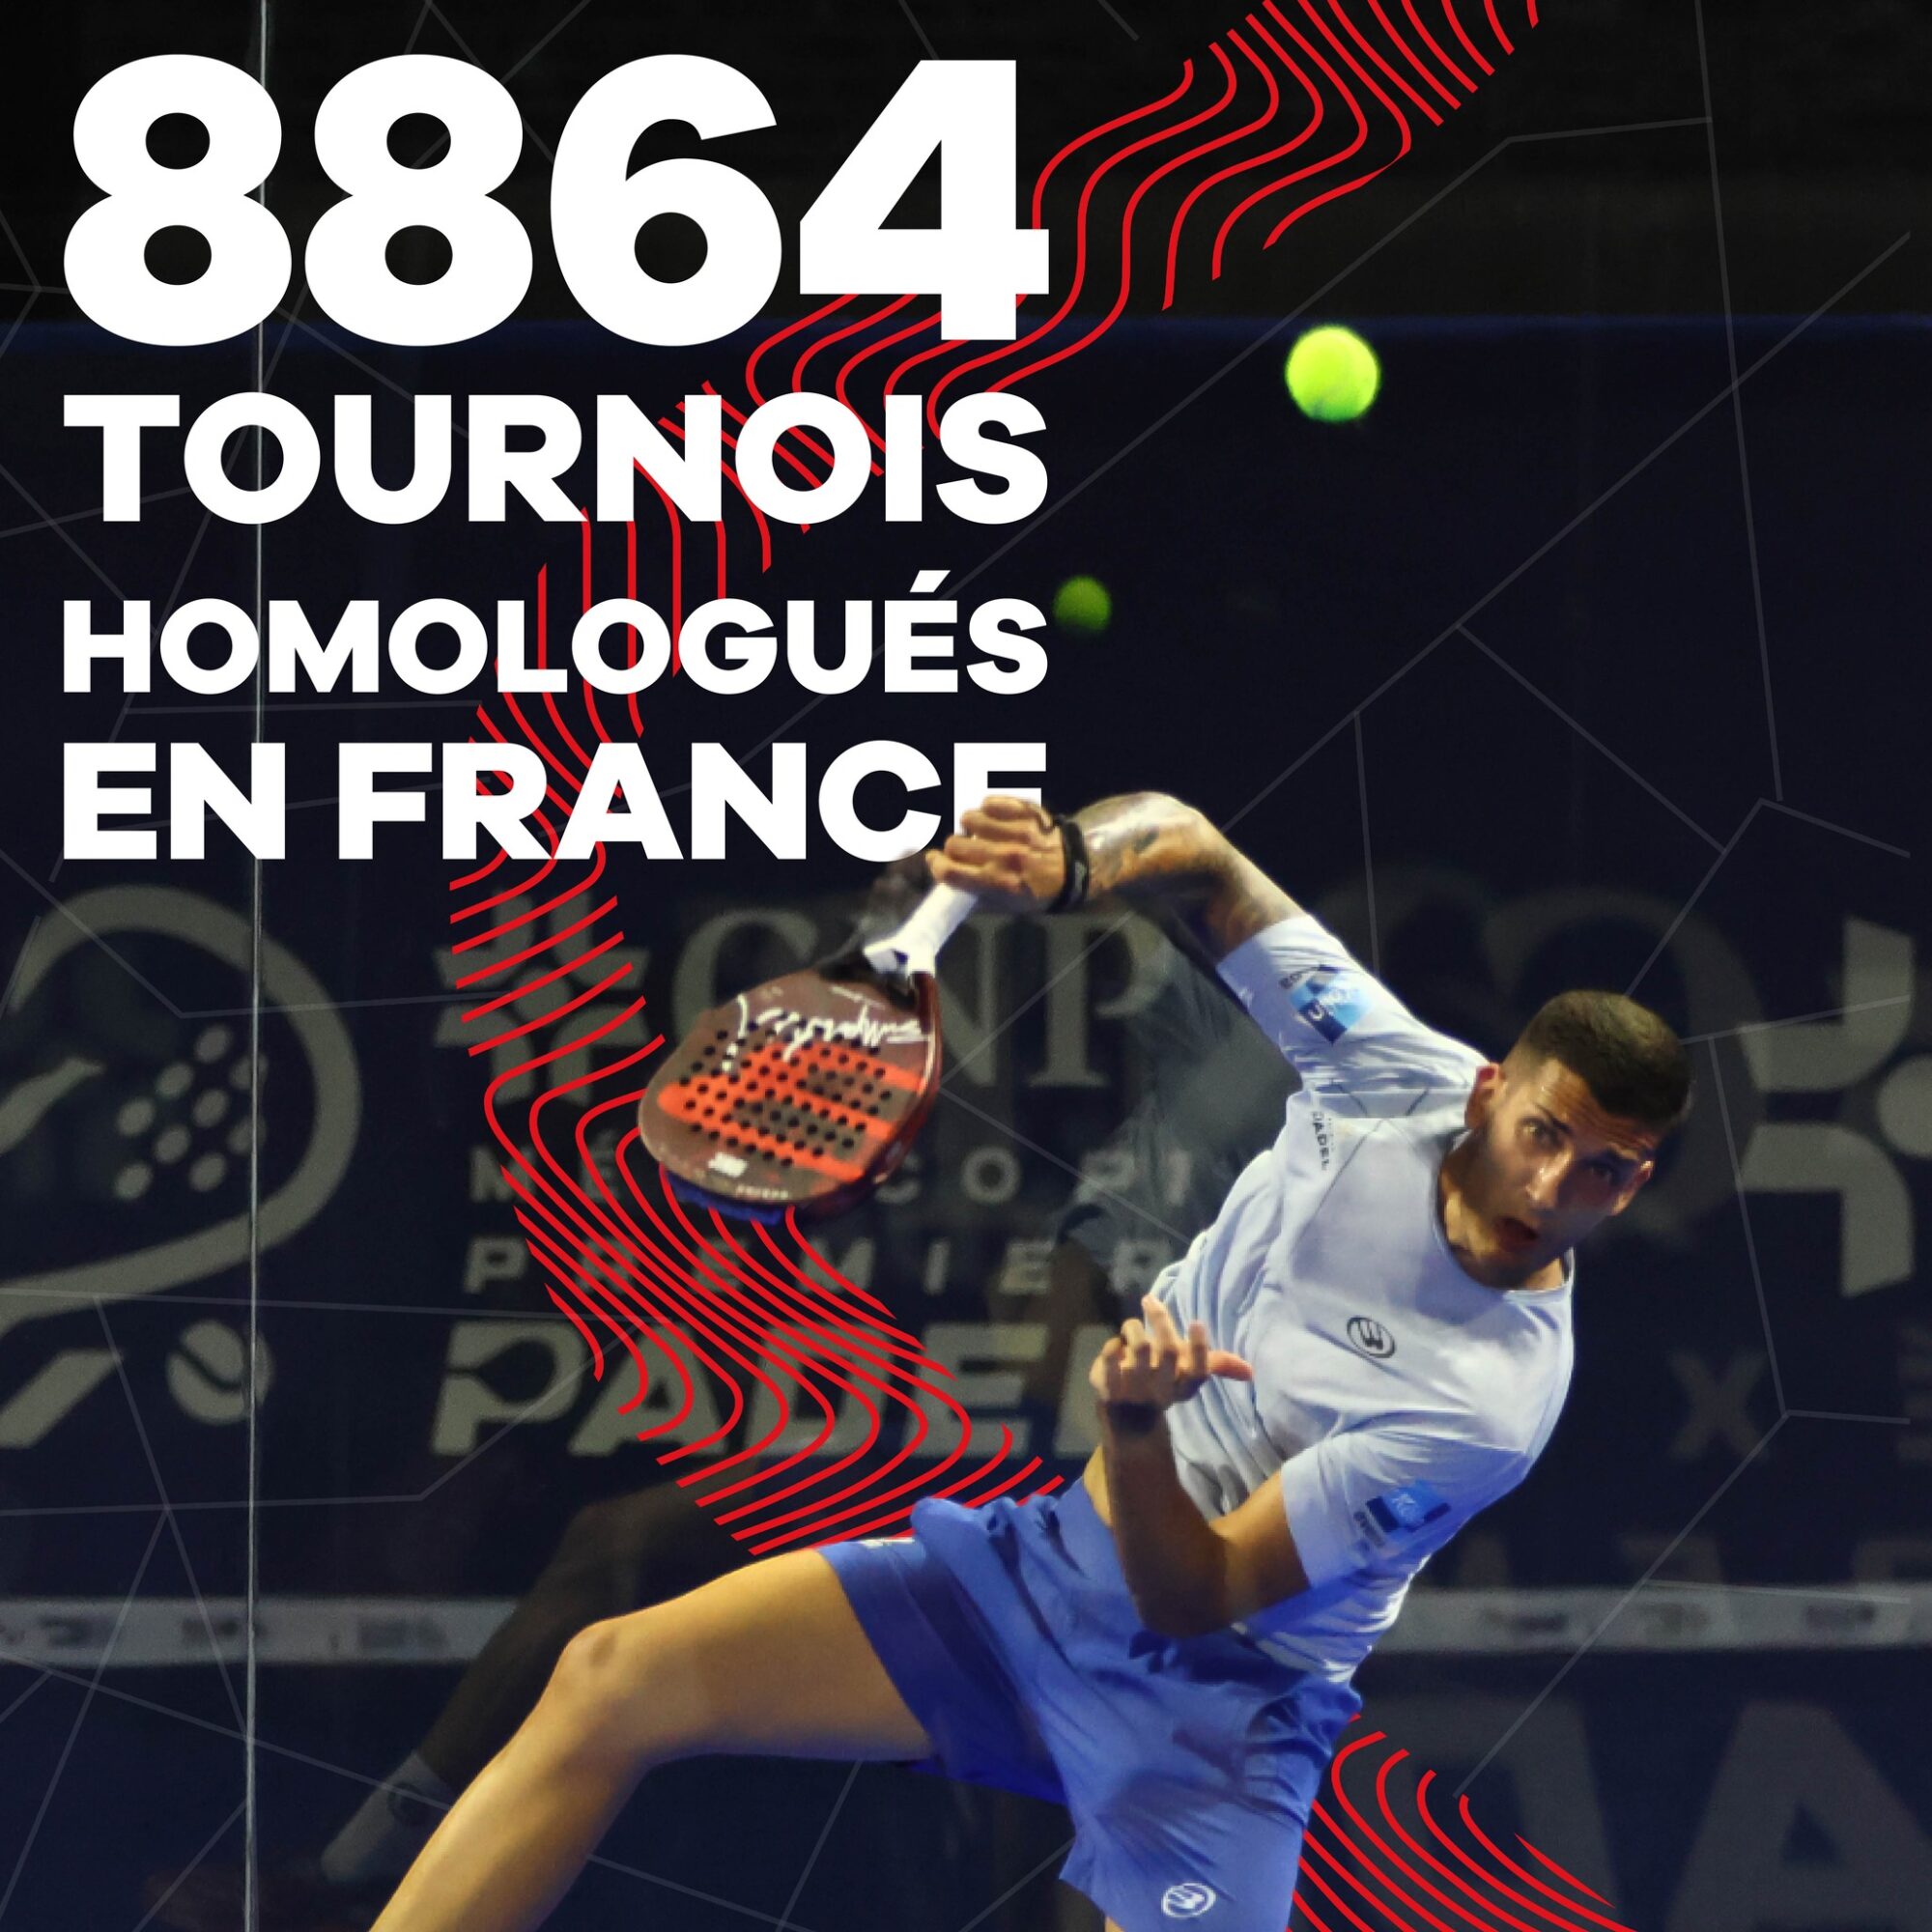 8864 tournaments approved in France